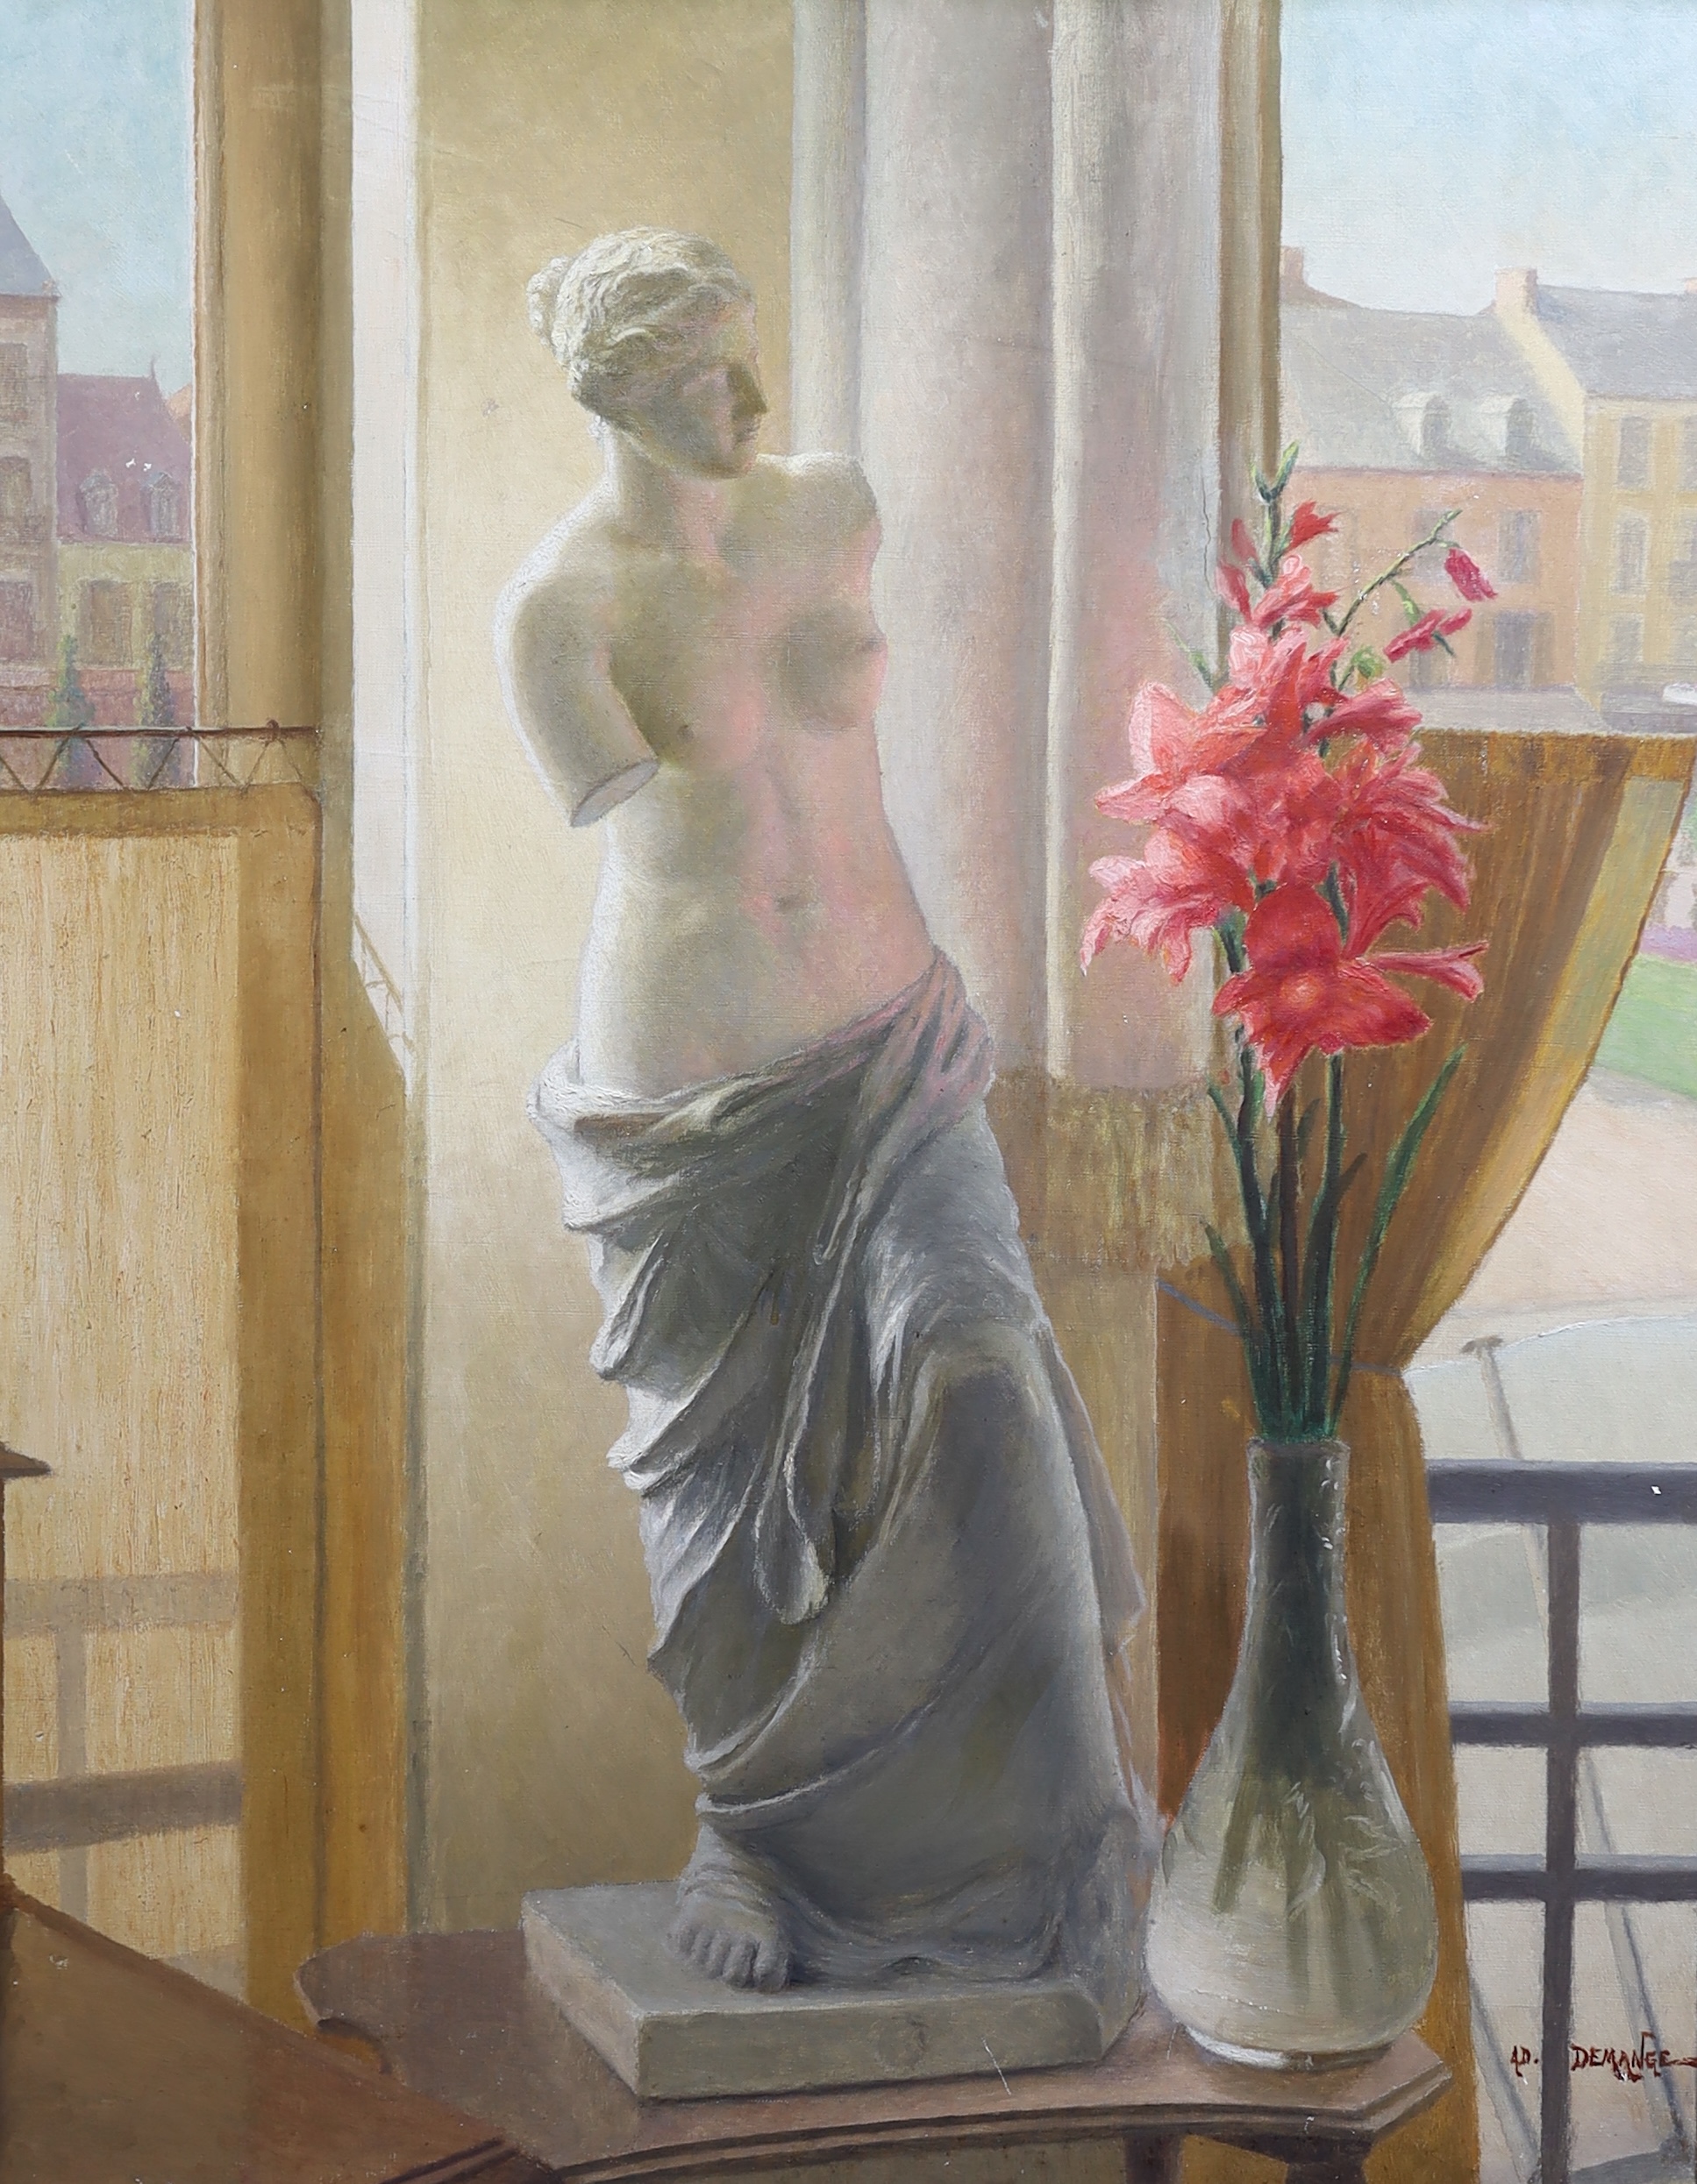 Adolphe Demange (French, 1857-1928), oil on canvas, 'Venus de Milo sculpture and gladioli in the window', signed, 97 x 77cm